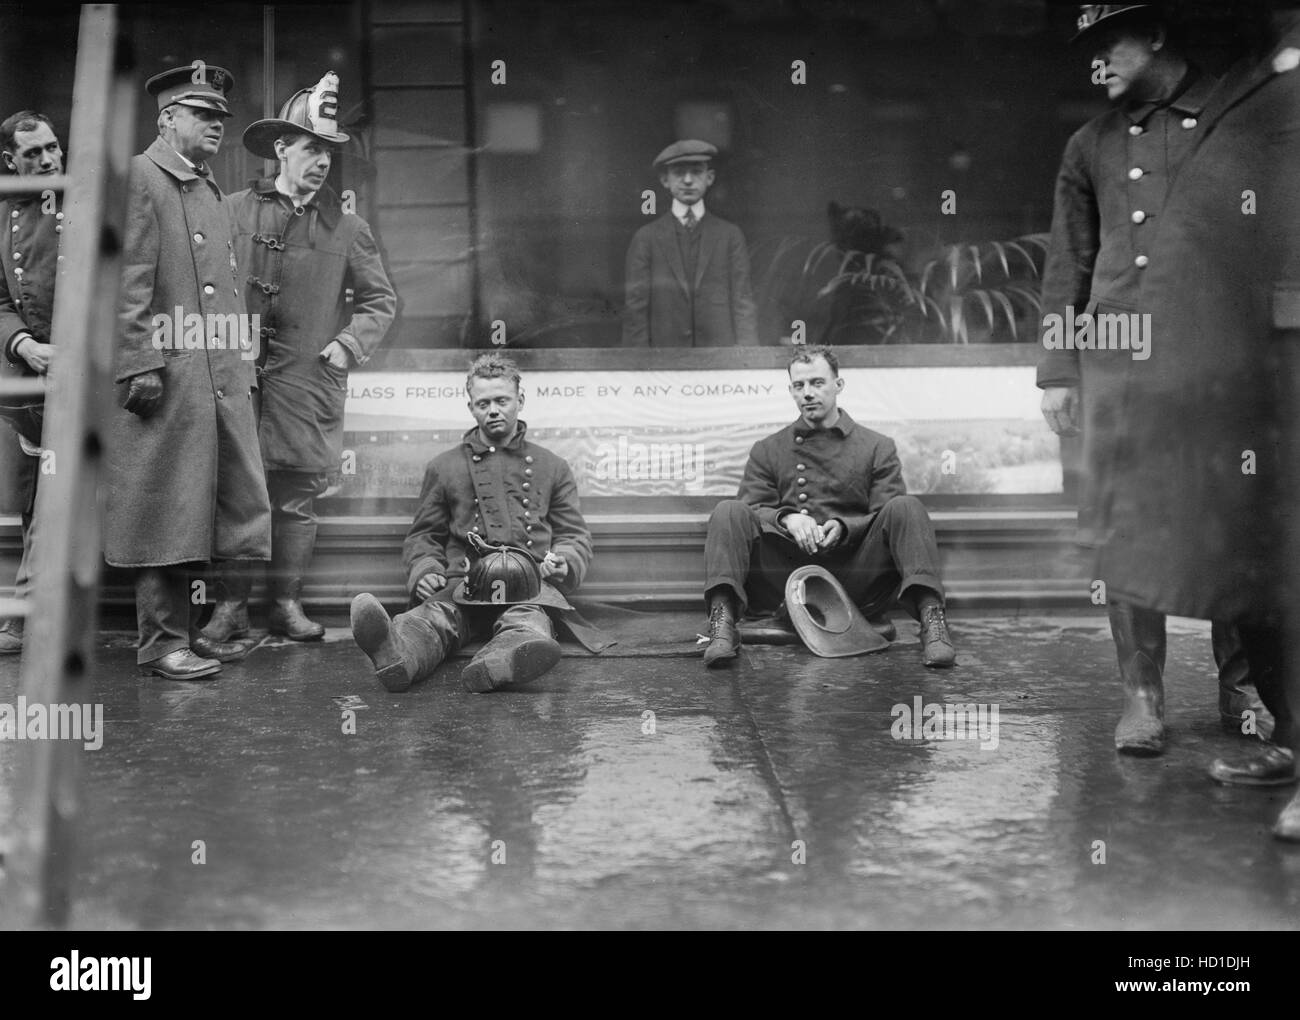 Firemen Seated on Sidewalk after Fighting Subway Tunnel Fire, West 55th Street and Broadway, New York City, New York, USA, Bain News Service, January 1915 Stock Photo